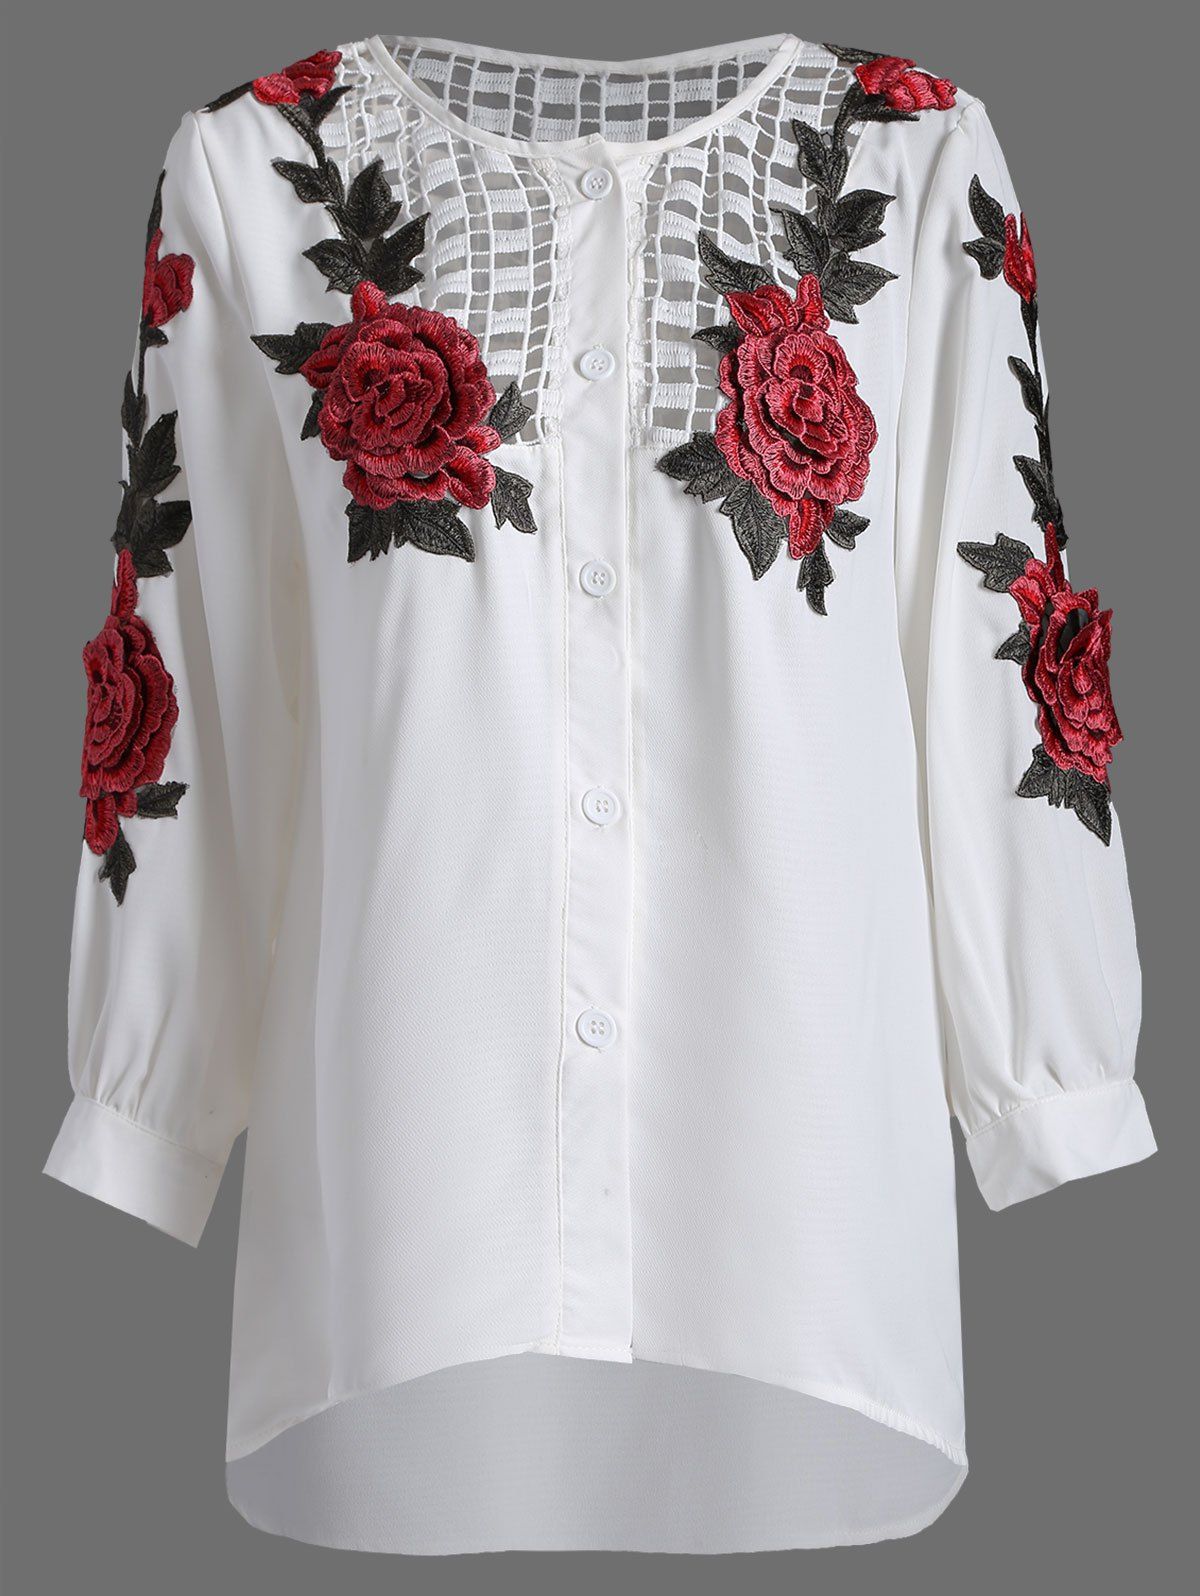 Openwork Rose Embroidery Blouse - WHITE L